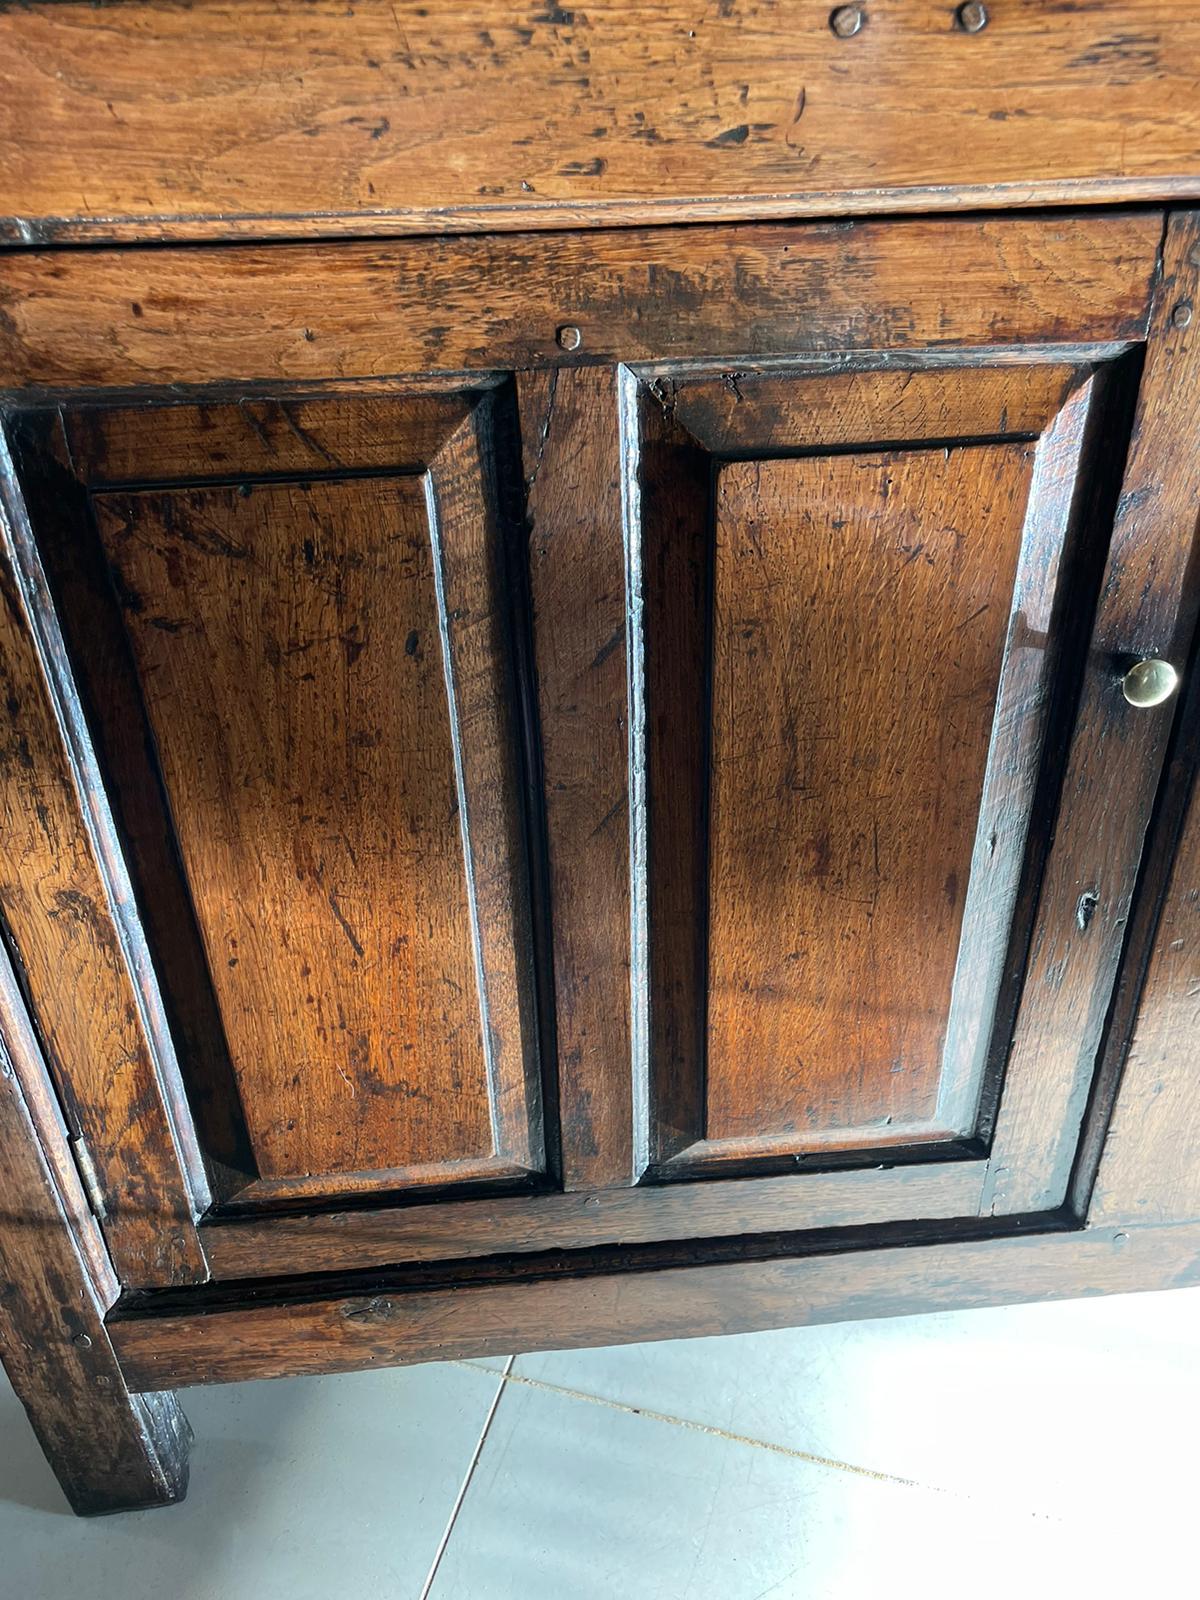 18th century antique quality oak dresser base having a quality oak top above three drawers with a moulded edge and brass knobs above a pair of panelled doors opening to reveal a shelf interior 

The colour and aged patination of this quality piece